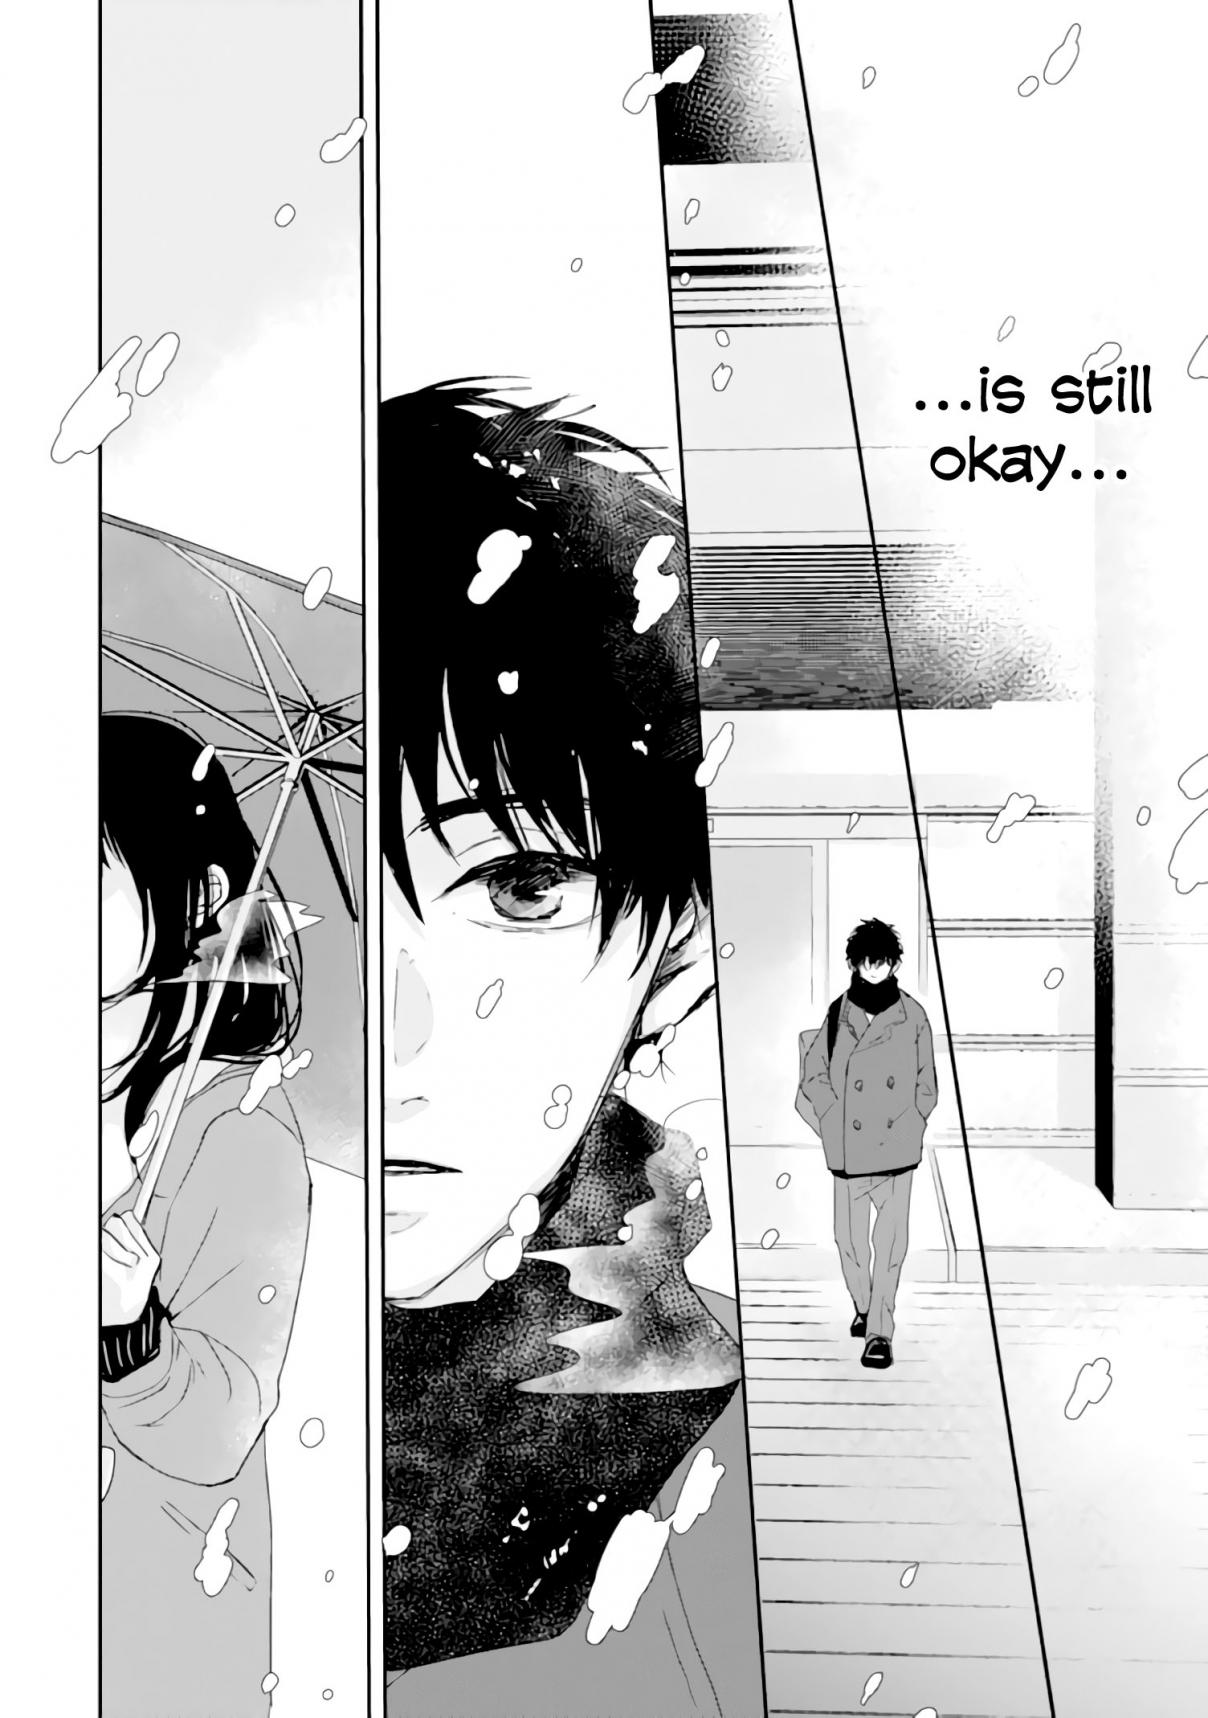 10th You and I Fell in Love With the Same Person. Vol. 2 Ch. 8 The Loved